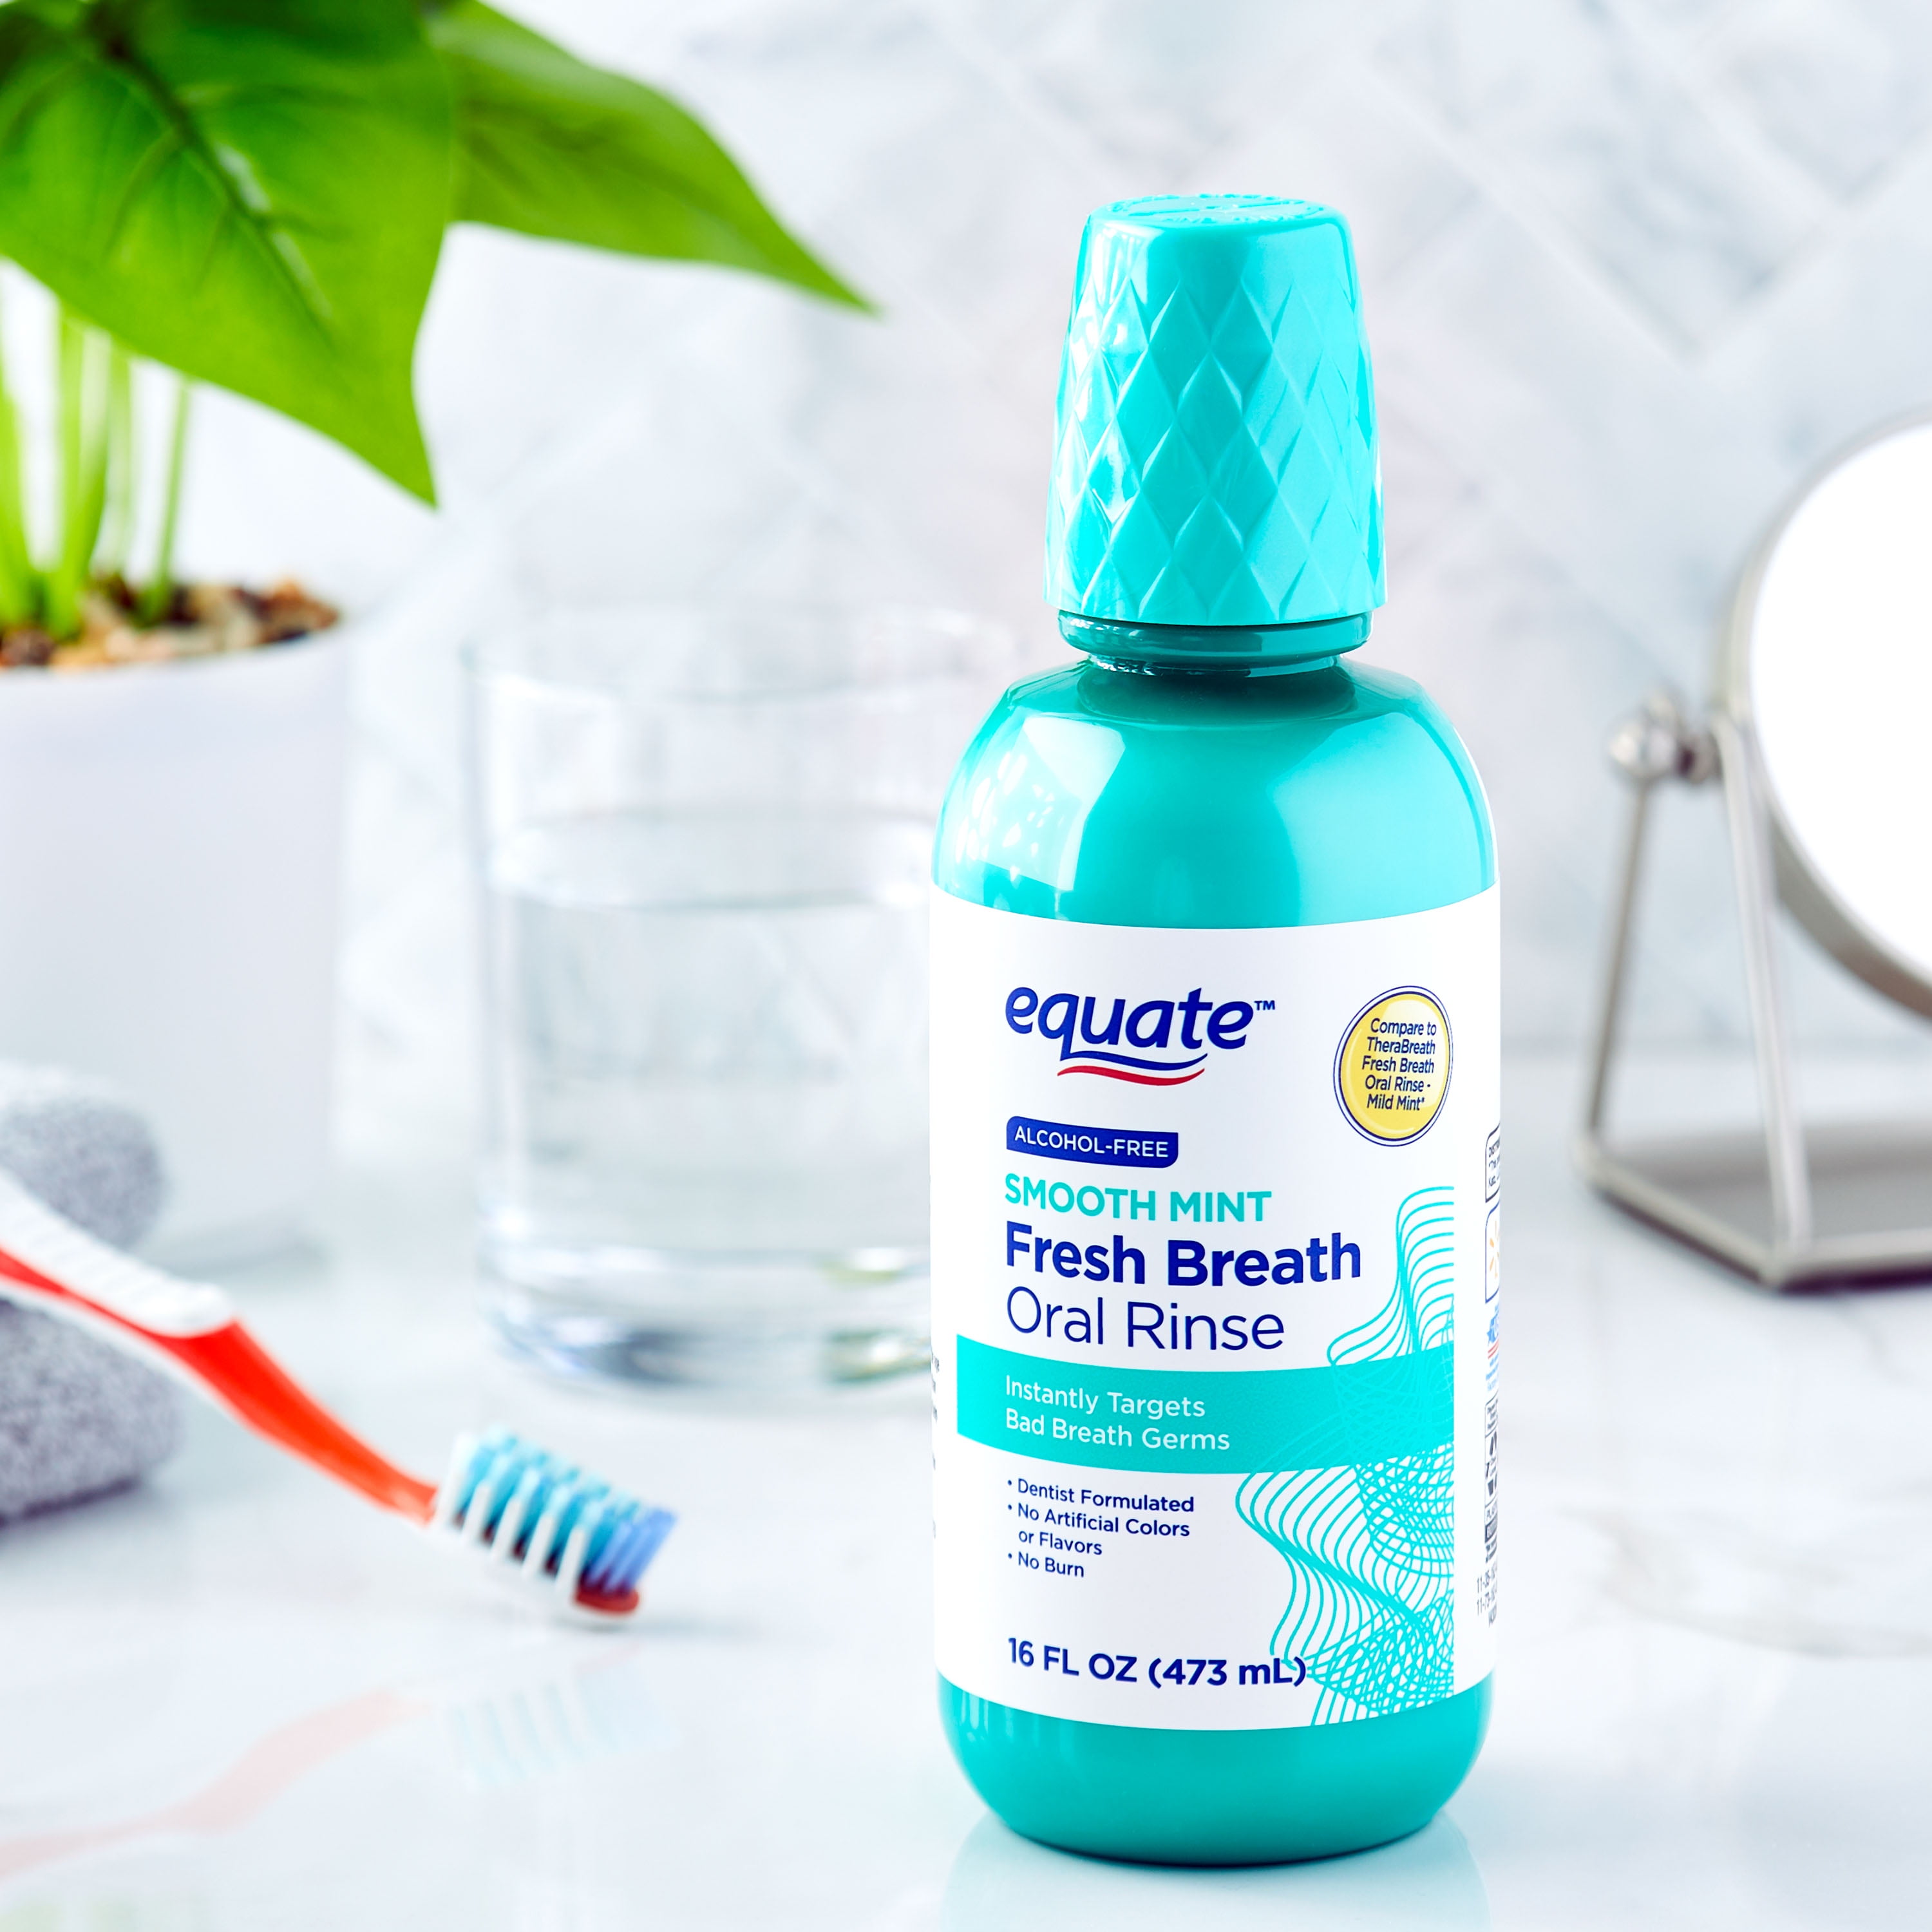 Equate Fresh Breath Oral Rinse Alcohol Free Mouthwash, Smooth Mint